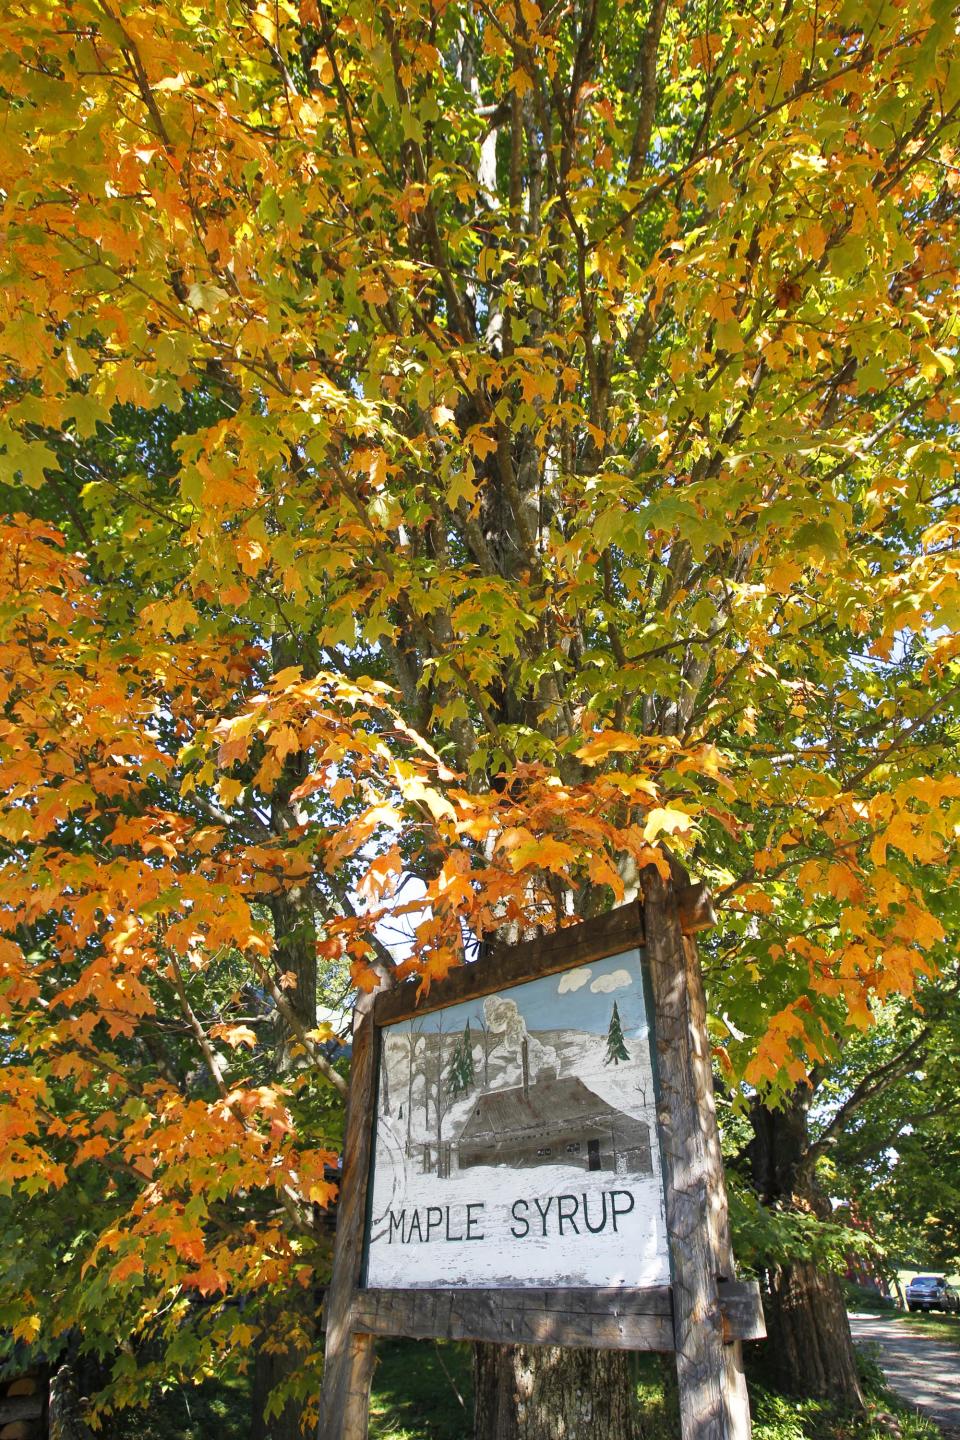 In this Sept. 12, 2012 photo, leaves have started turning colors on a tree in Craftsbury, Vt. After images of Tropical Storm Irene scared away leaf peepers last fall, tourists are heading back to see the Northeast's fall foliage a year later and aren't worried about how the dry summer might affect the color. (AP Photo/Toby Talbot)